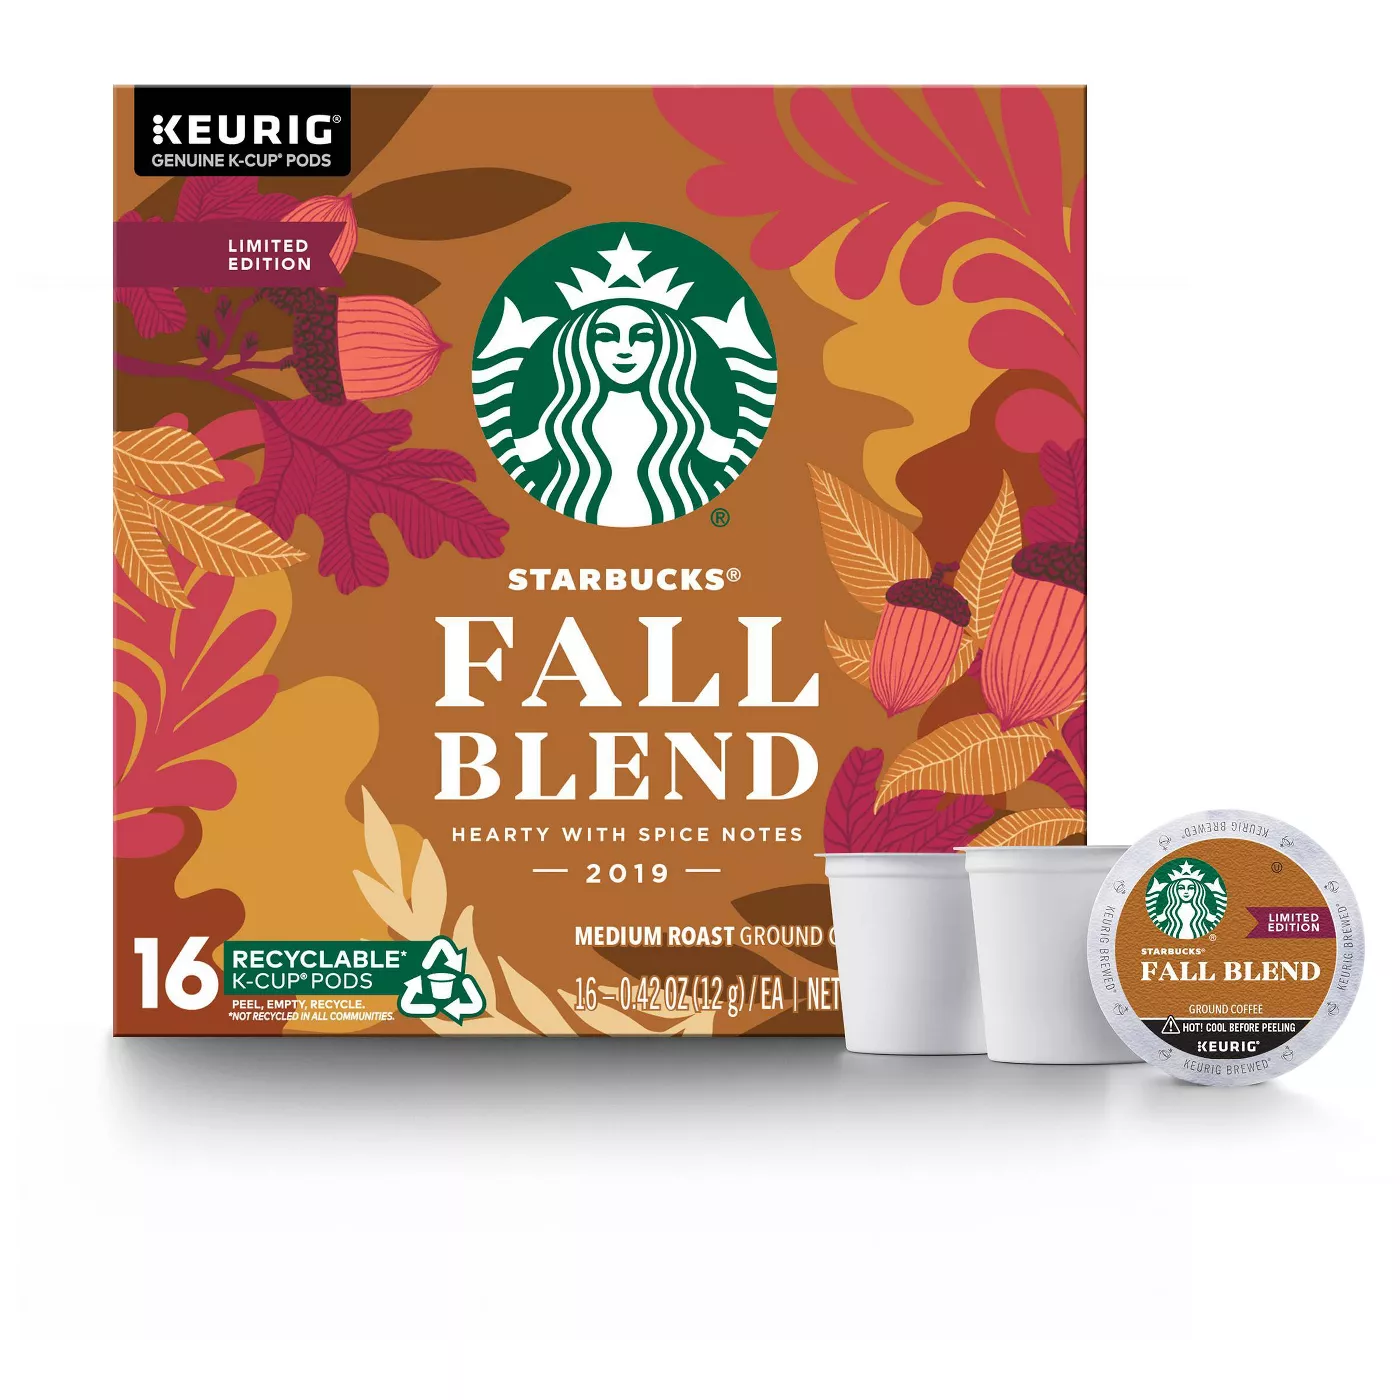 Starbucks Fall Blend Hearty with Spice Notes Medium Roast Coffee - Keurig K-Cup Pods - 16ct - image 1 of 5